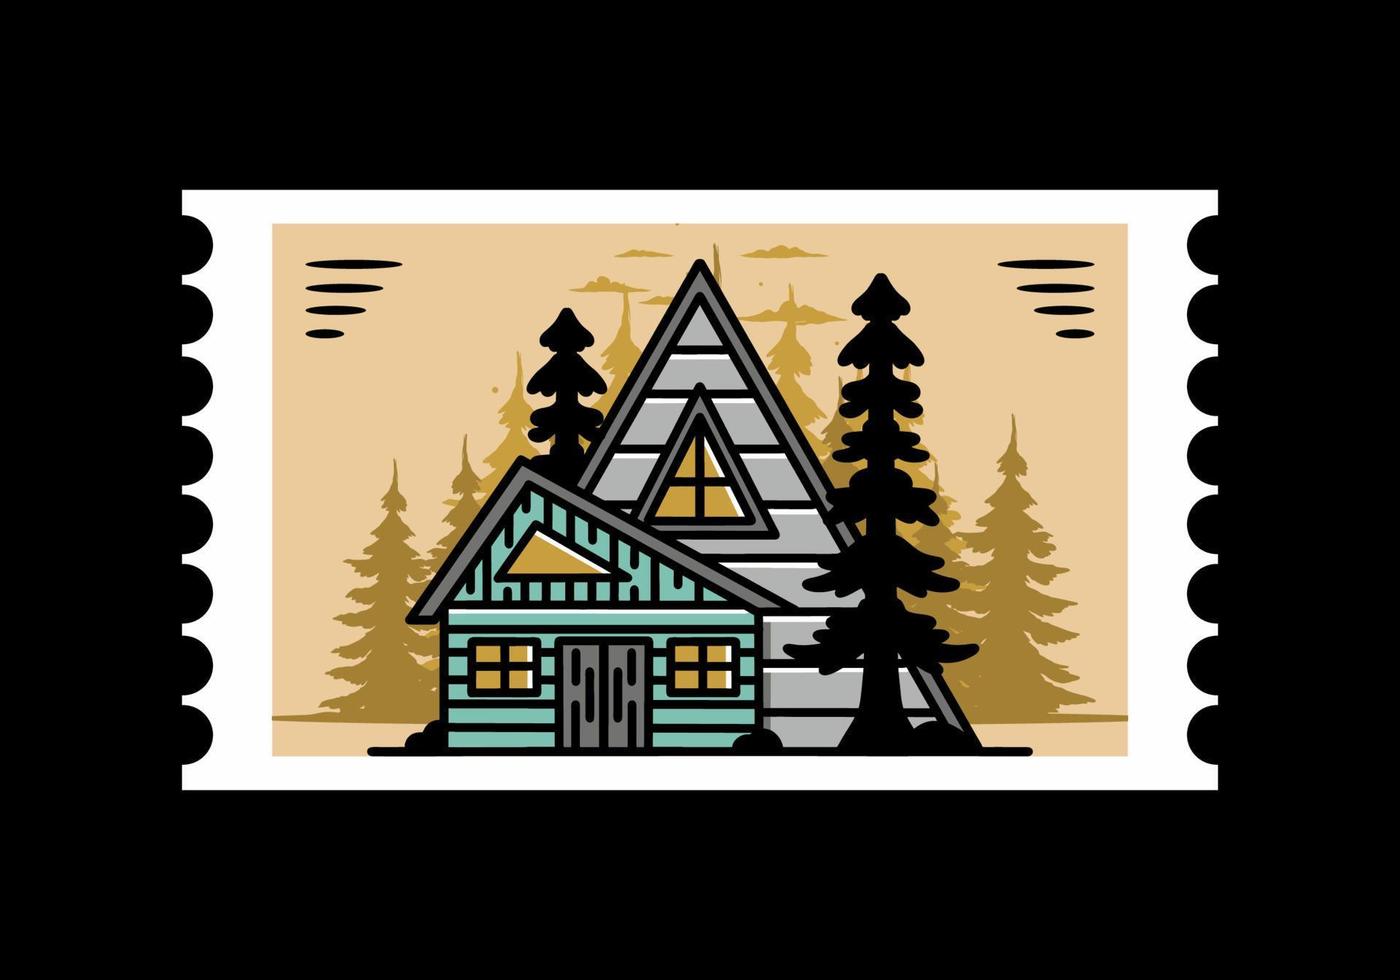 Aesthetic wood house between two pine tree illustration badge design vector